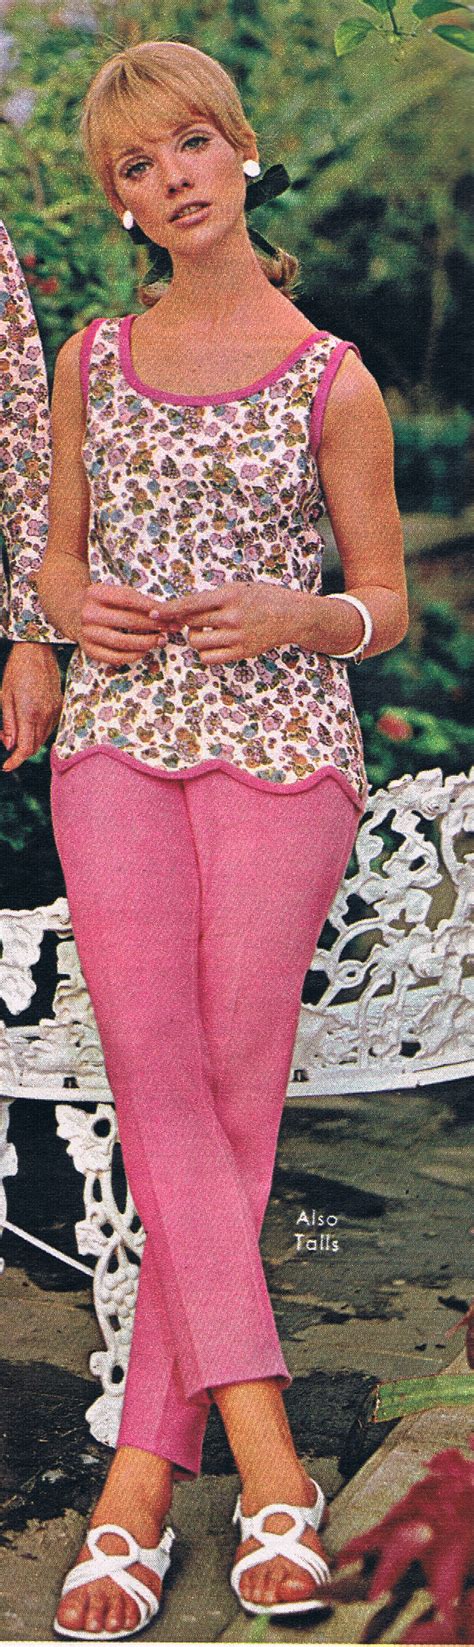 Spiegel 1966 Catalog Cay Sanderson 60s And 70s Fashion